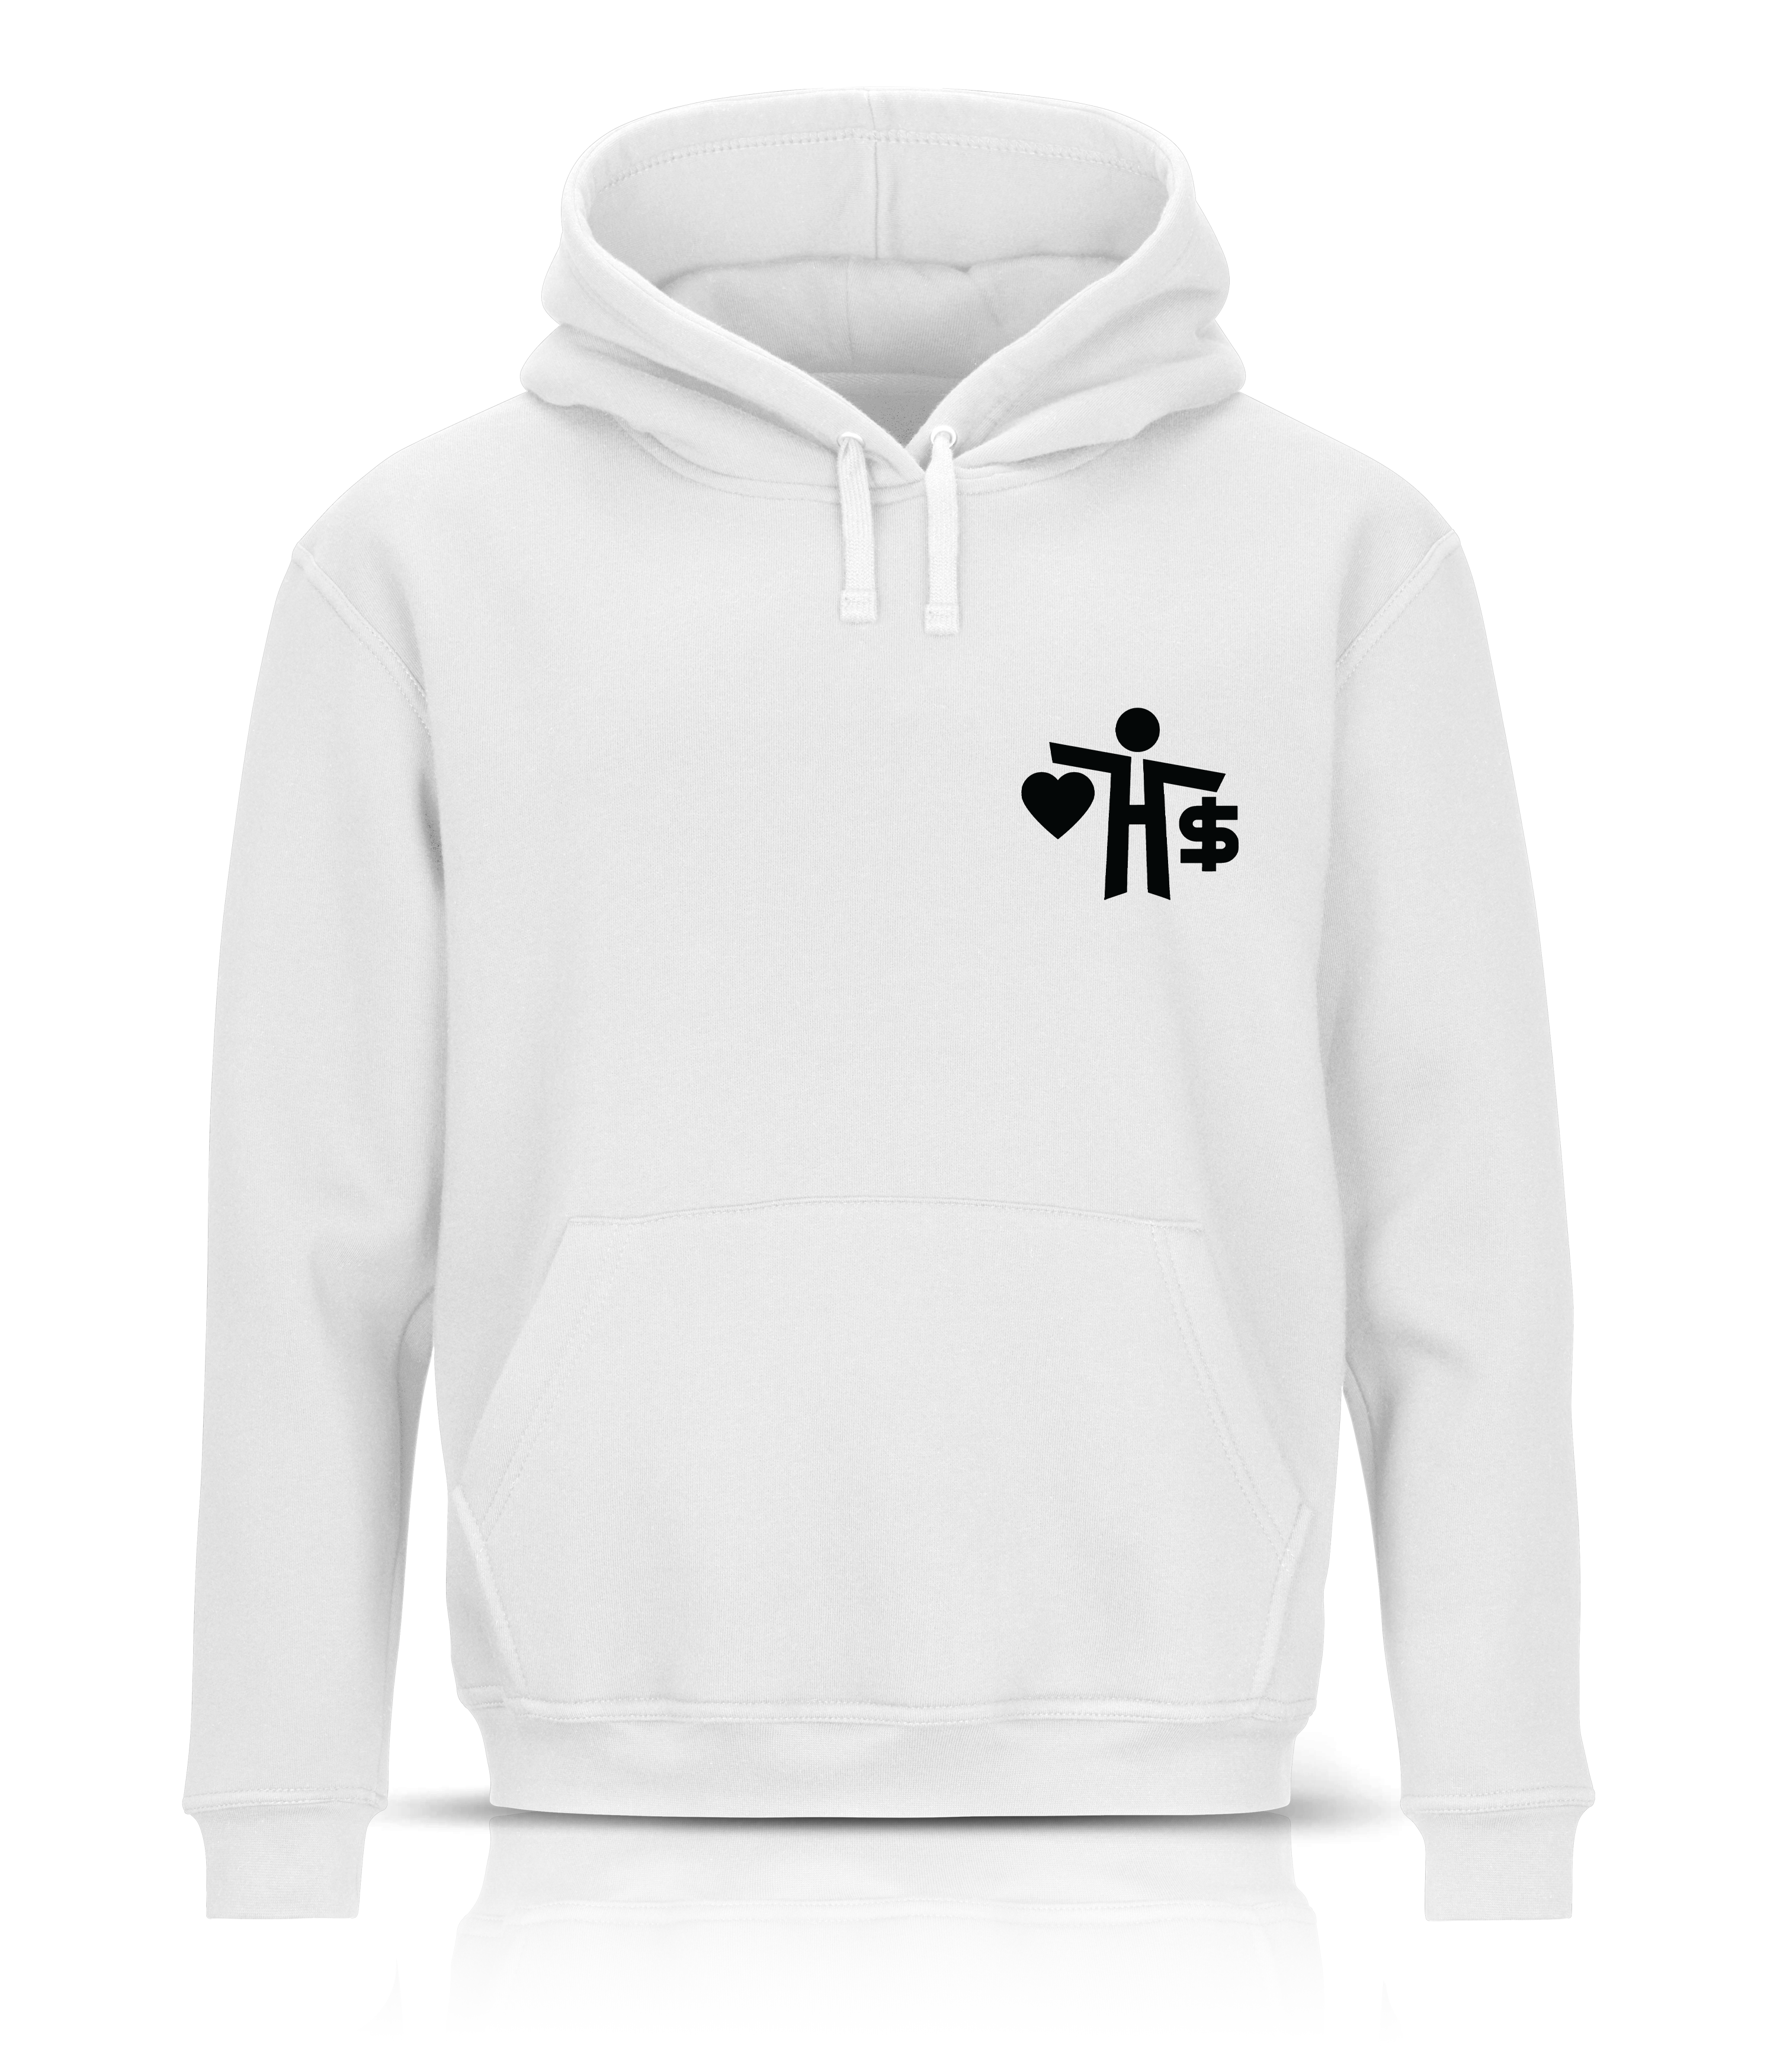 Honest Hustle “For The Love Over Money” Icon Hoodie